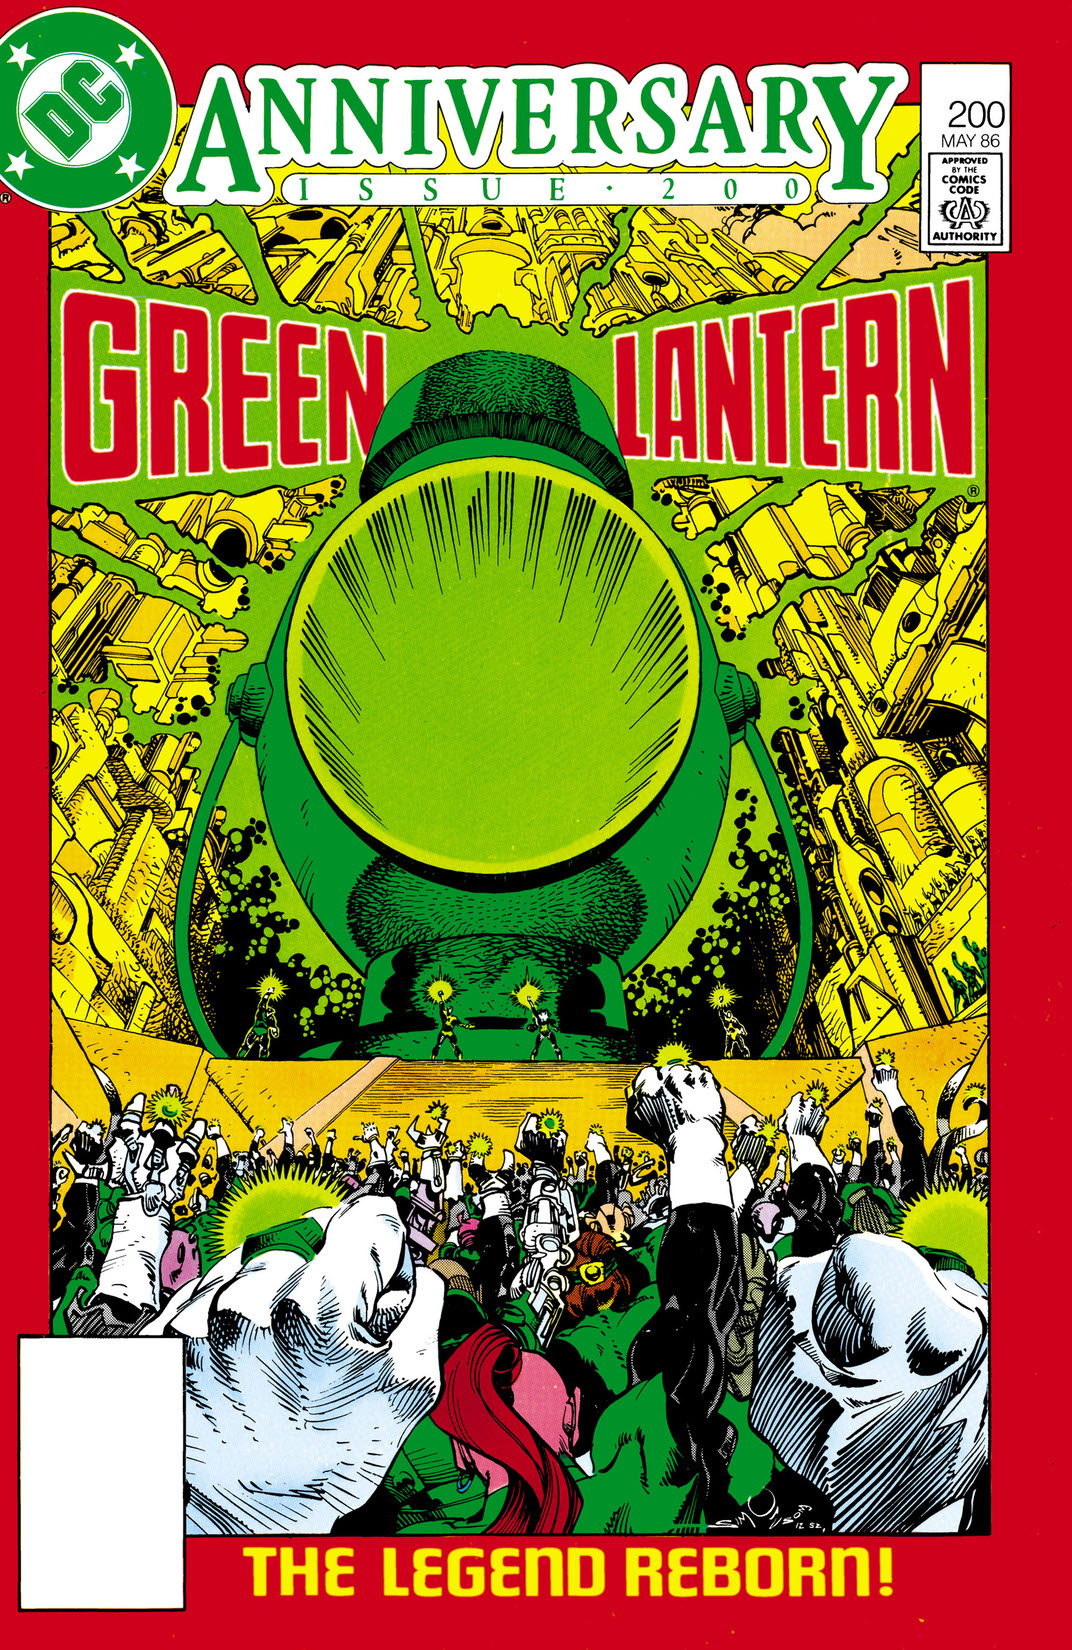 Green Lantern (1960-) #200 preview images